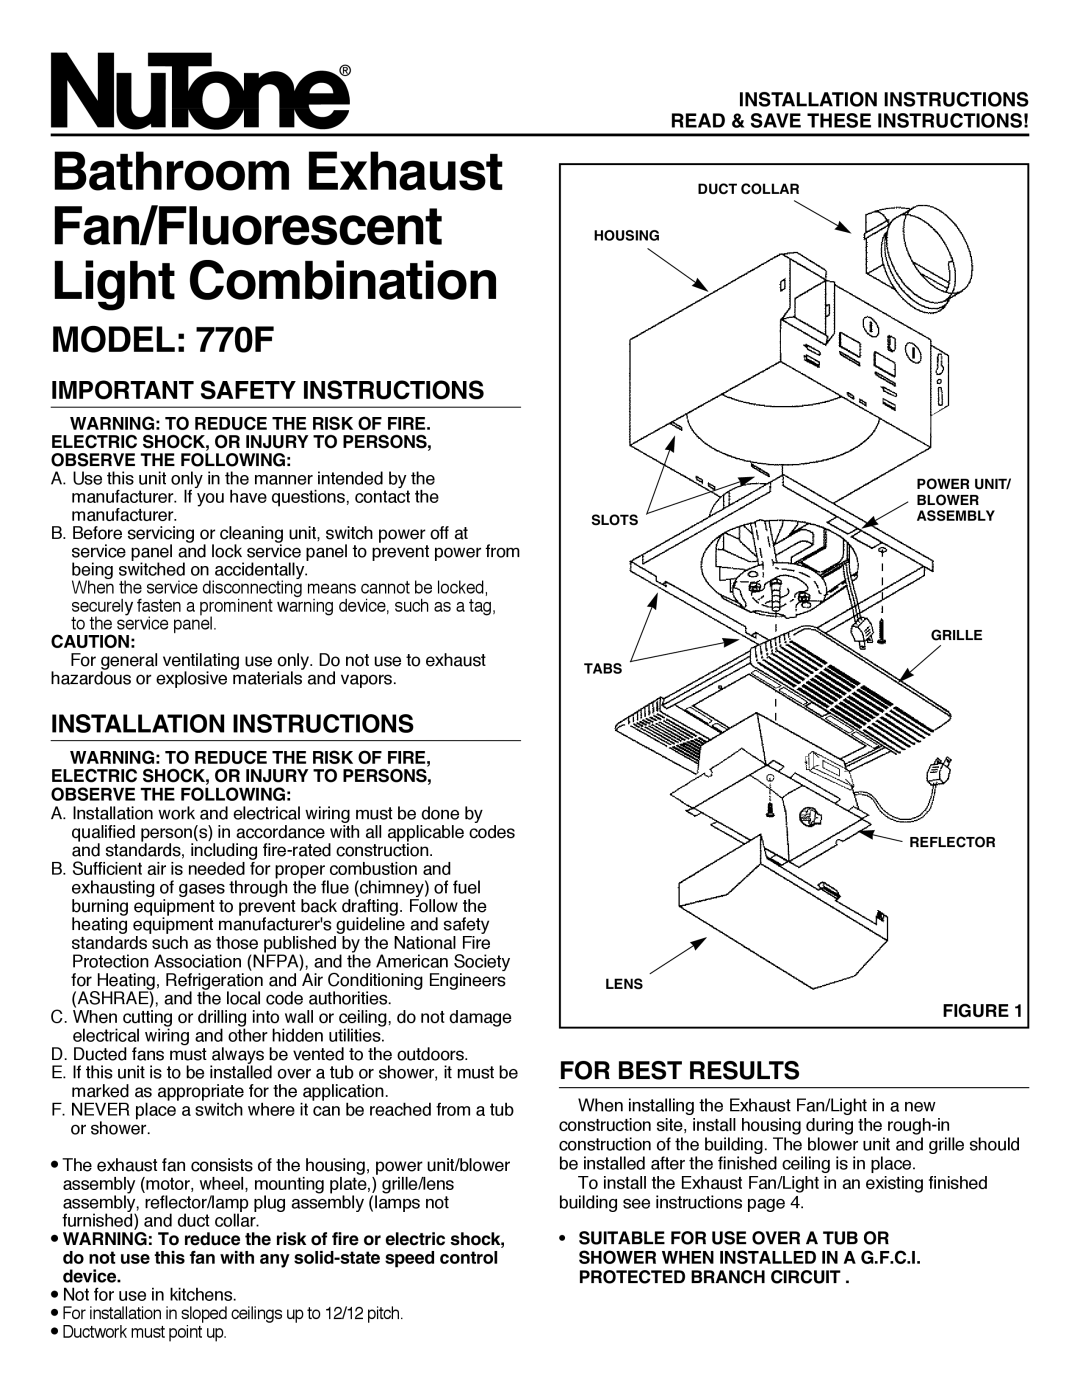 NuTone 770F installation instructions Important Safety Instructions, Installation Instructions, For Best Results 